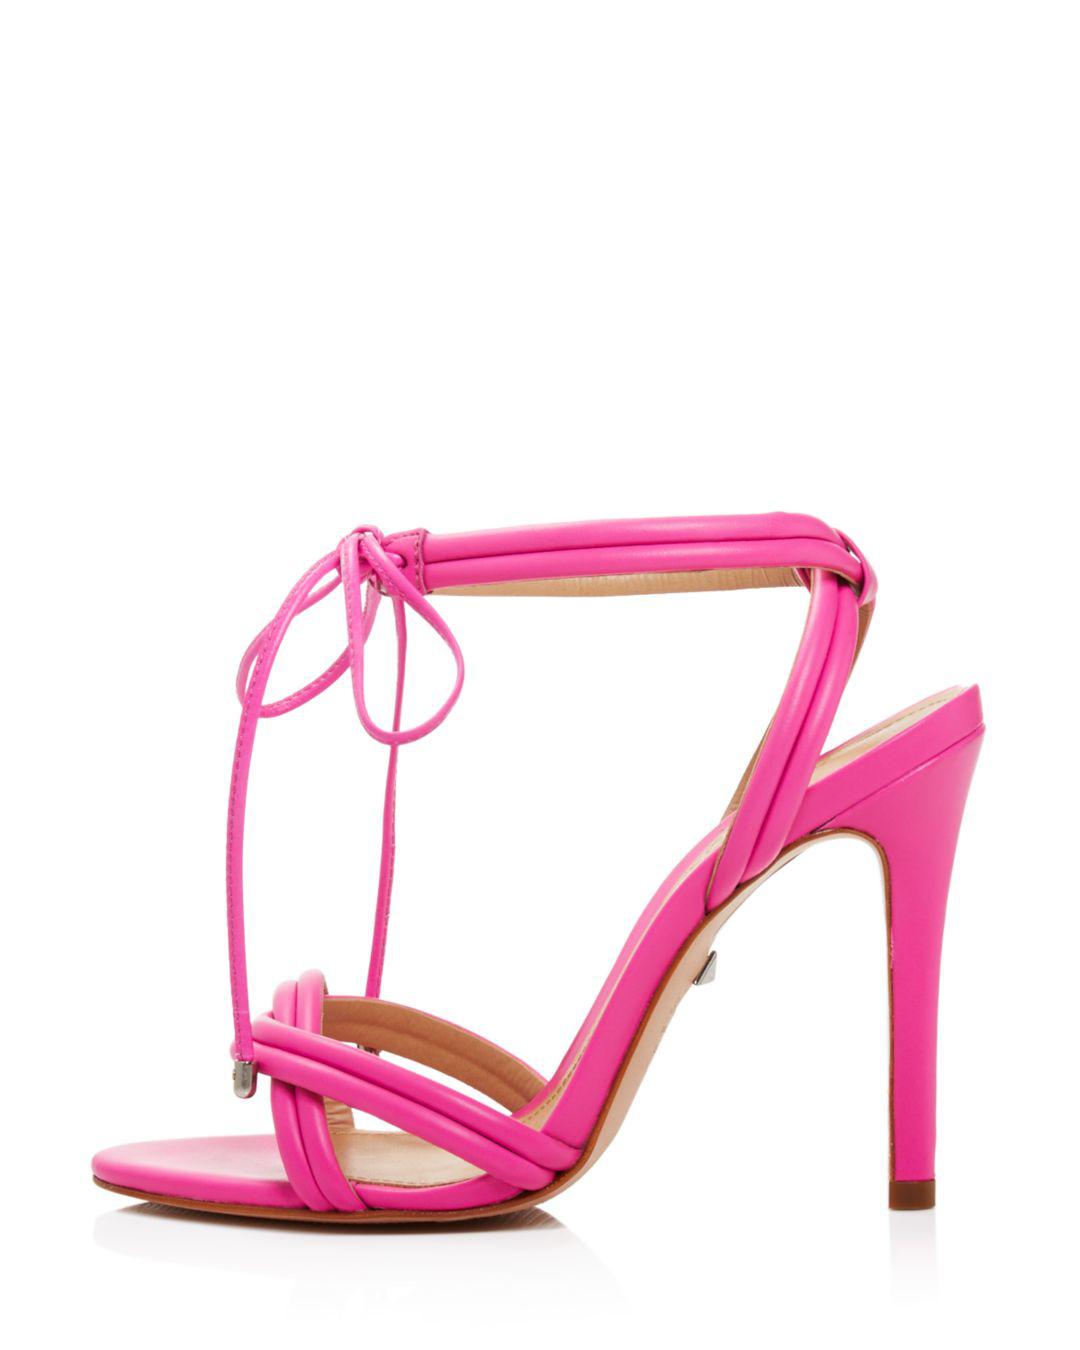 Lyst - Schutz Yvi Twisted Leather Ankle-tie Sandals in Pink - Save 6. ...